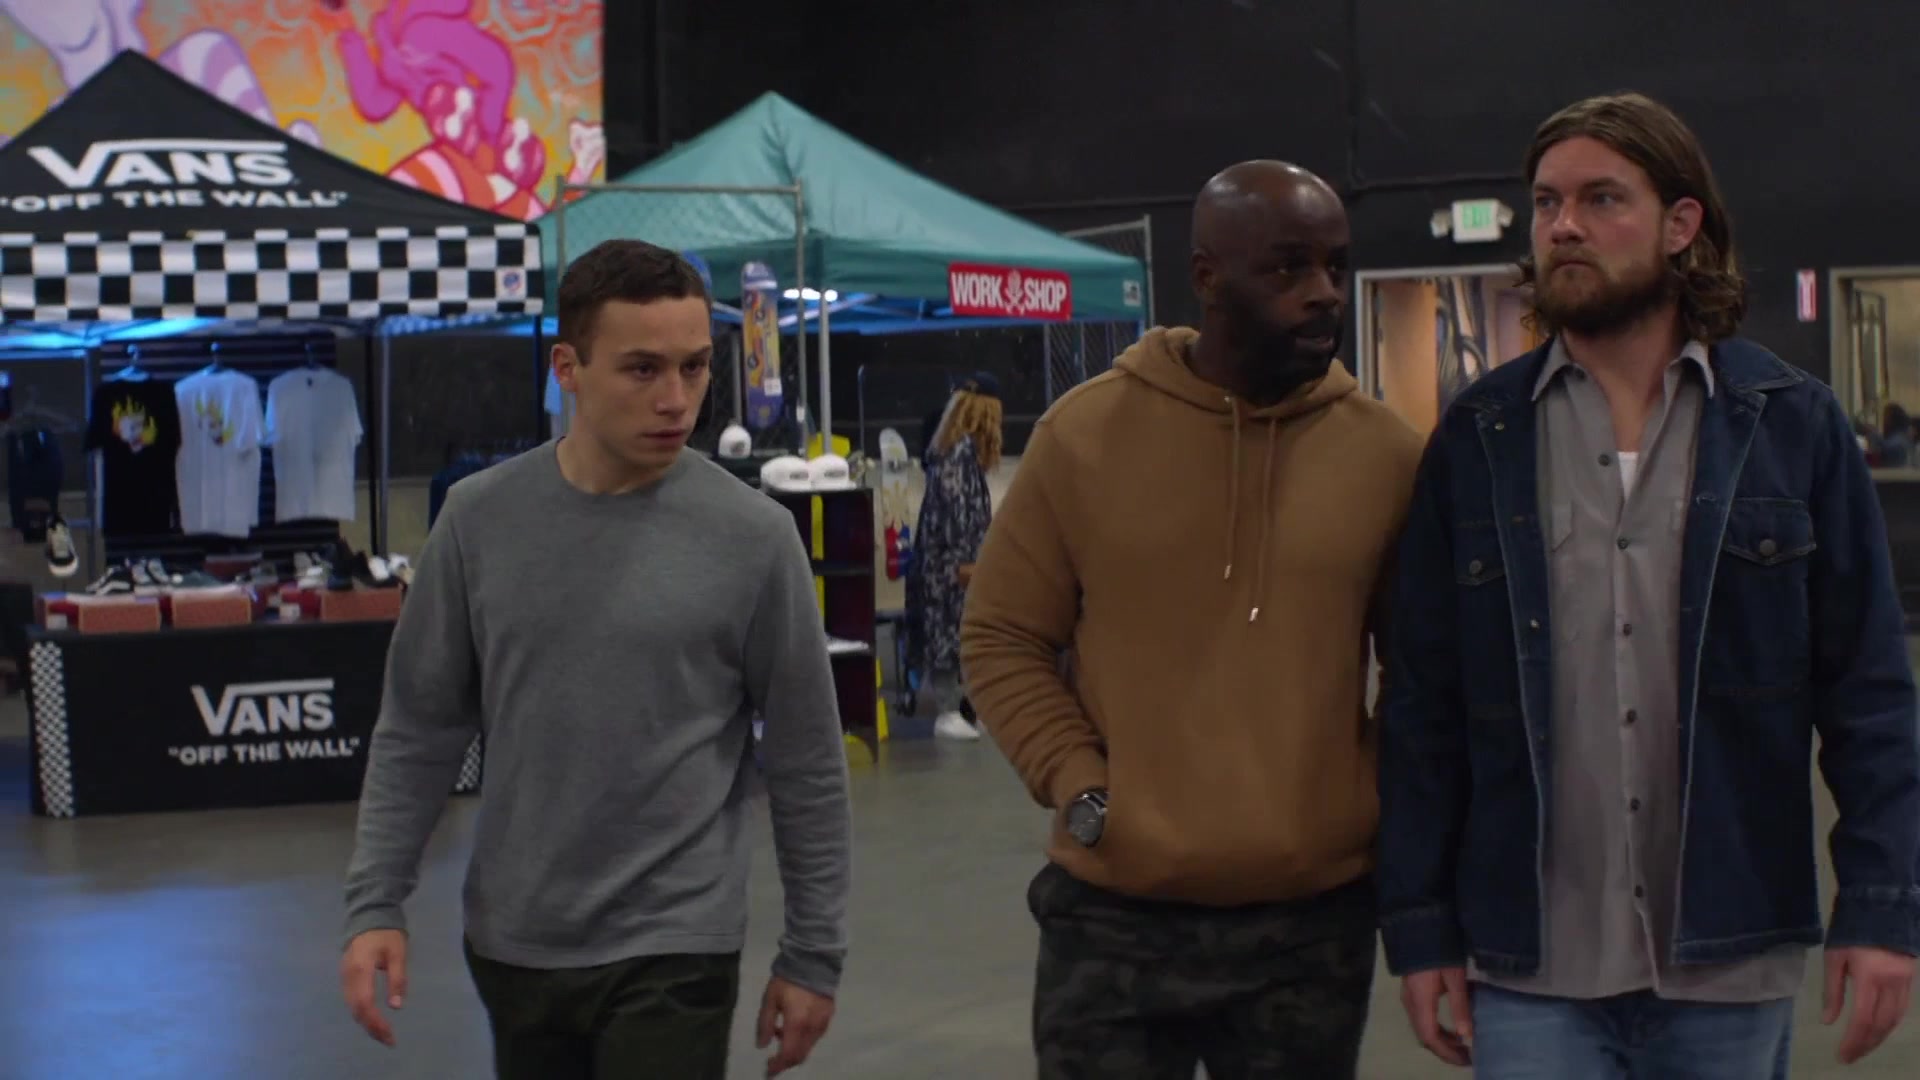 Vans 'Off The Wall' In Animal S05E05 "Family (2021)